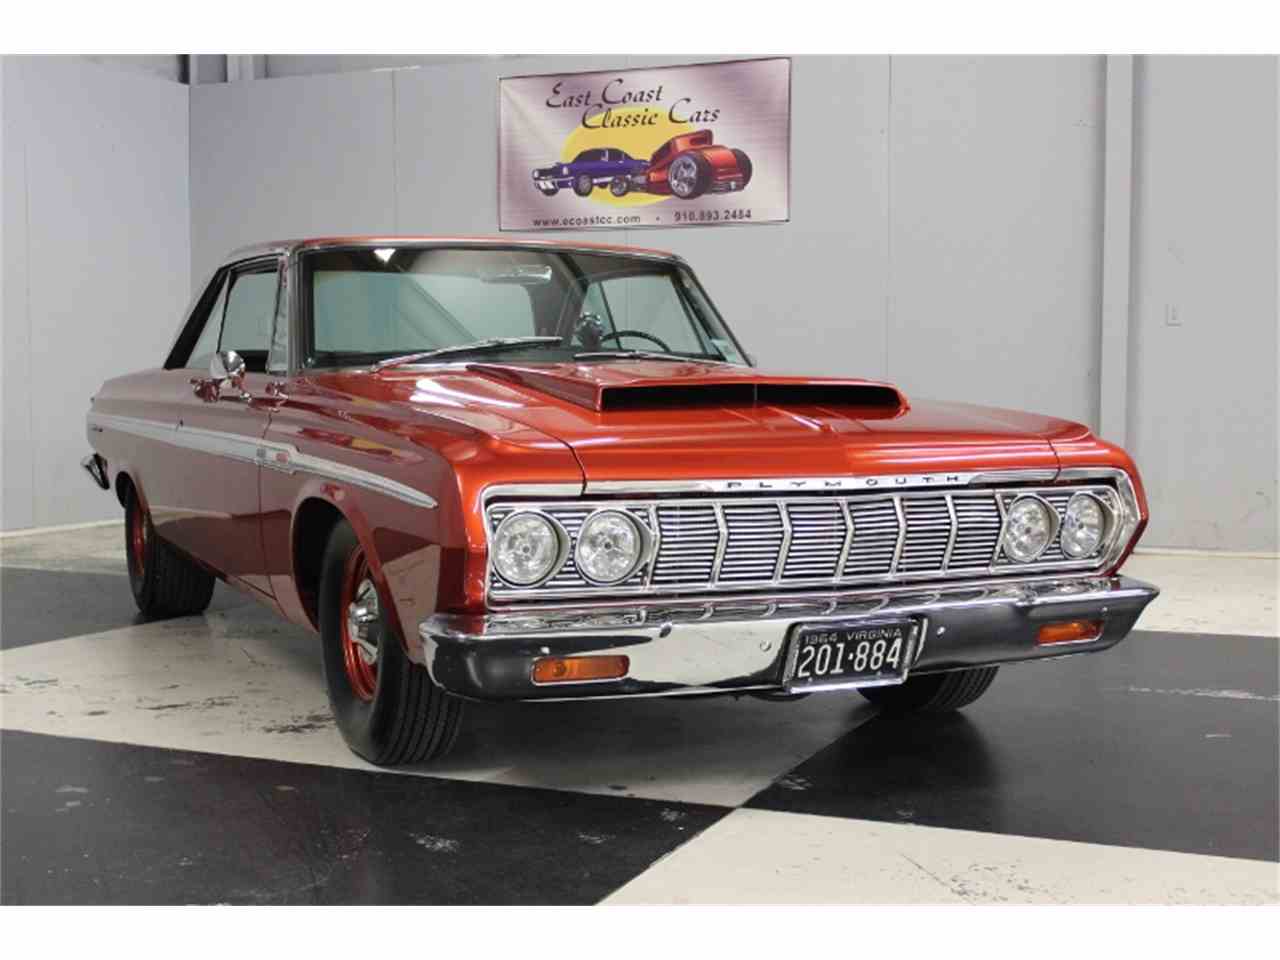 1964 Plymouth Sport Fury for Sale | ClassicCars.com | CC ...